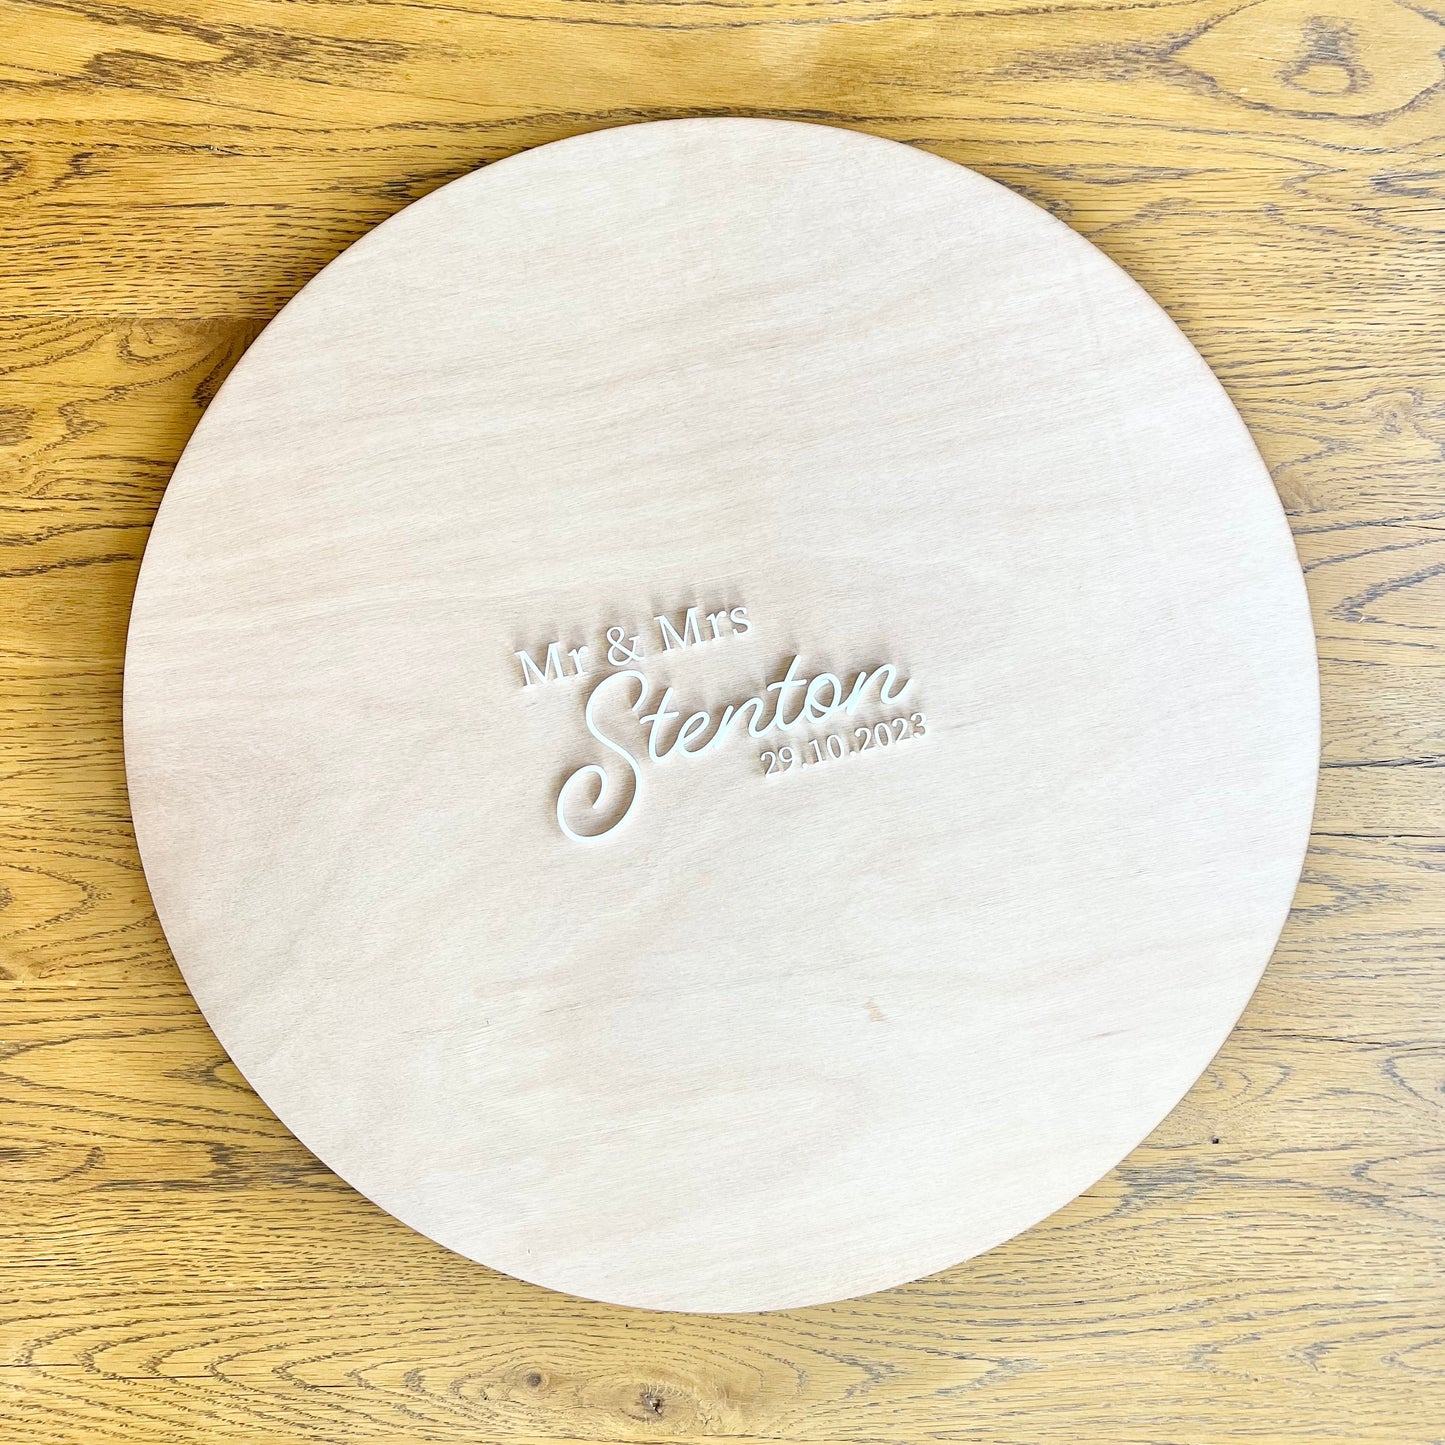 Guest book signing board in wood - with acrylic